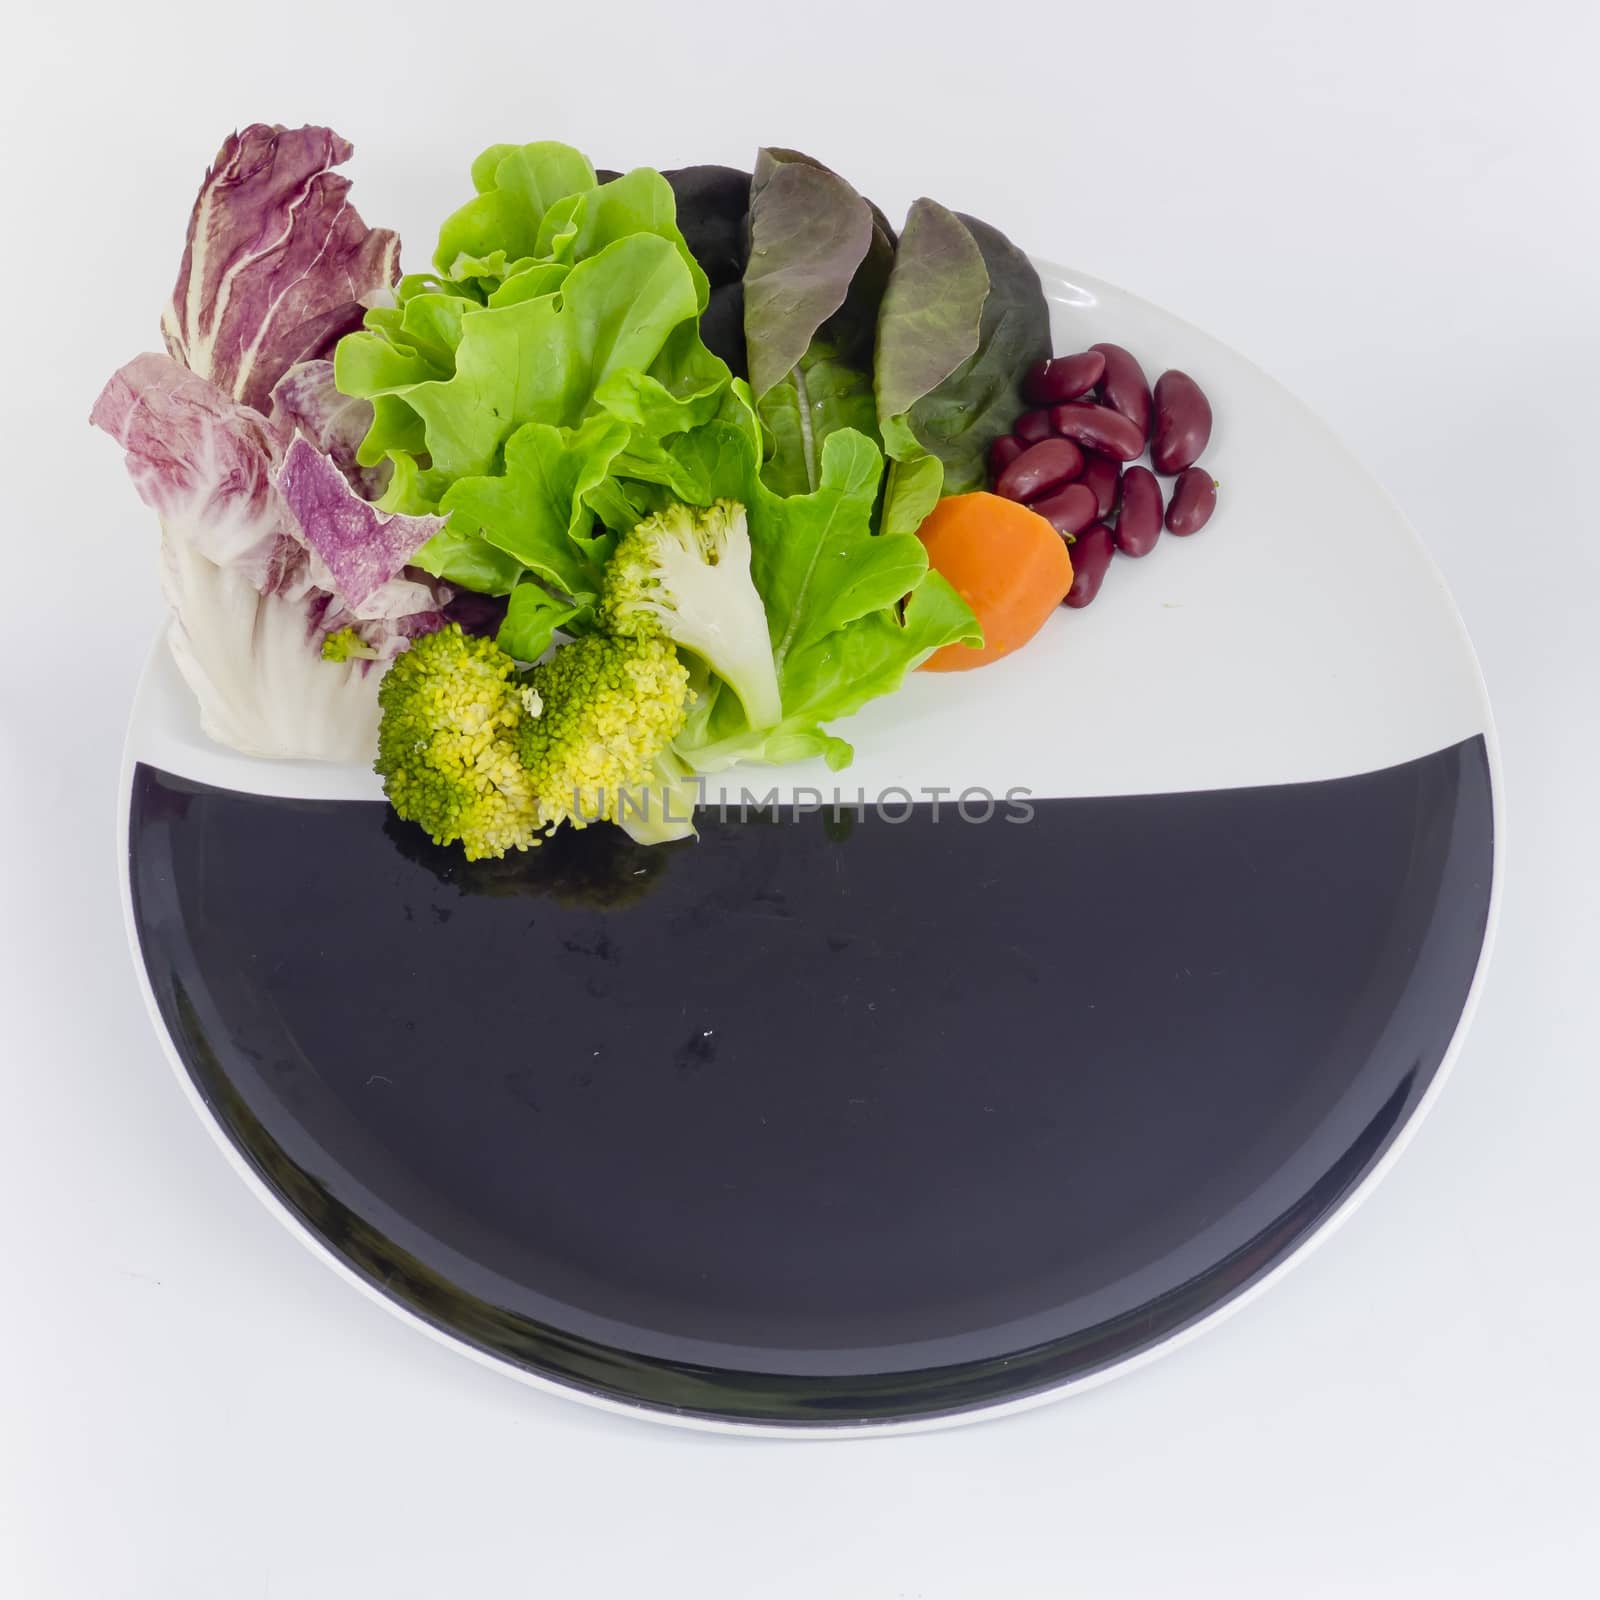 vegetable salad on plate with blank spcae for wording by art9858